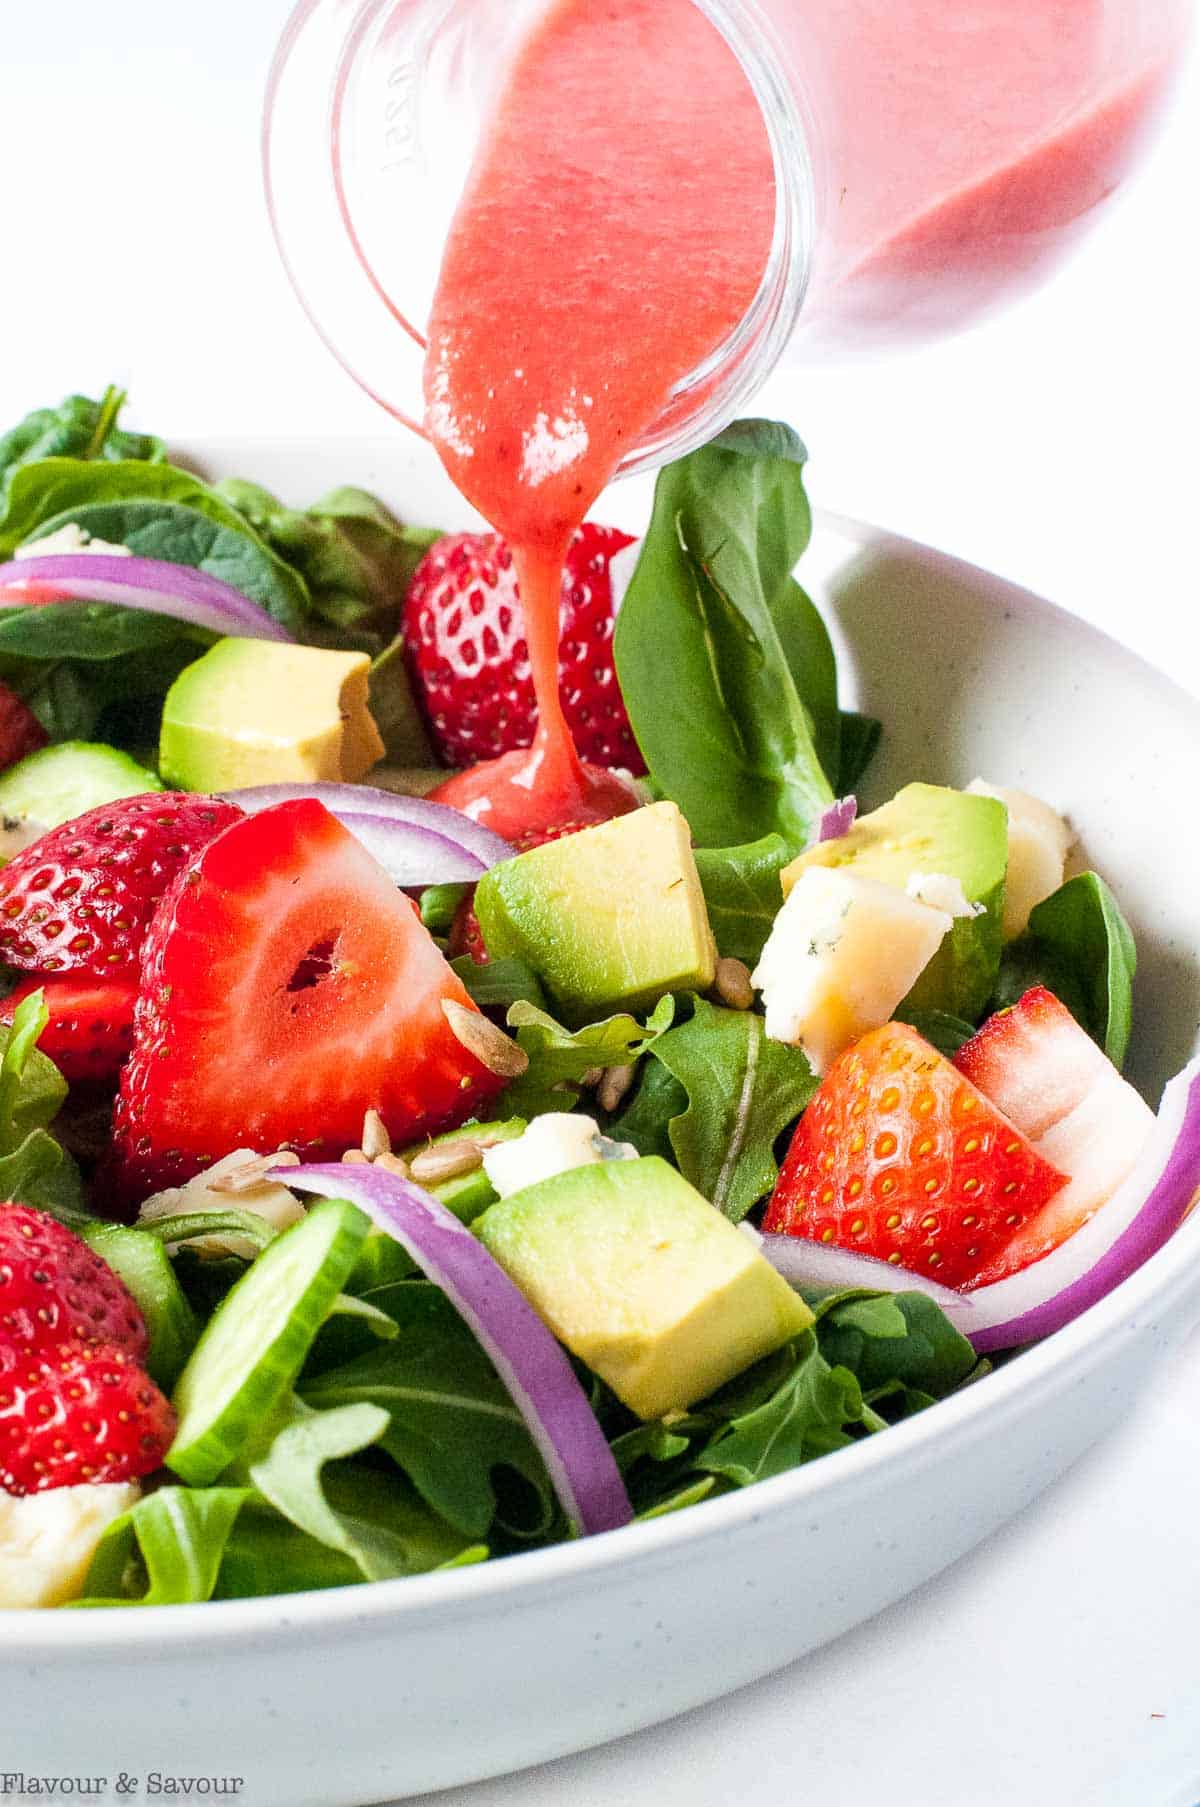 Pouring strawberry vinaigrette on strawberry spinach salad.